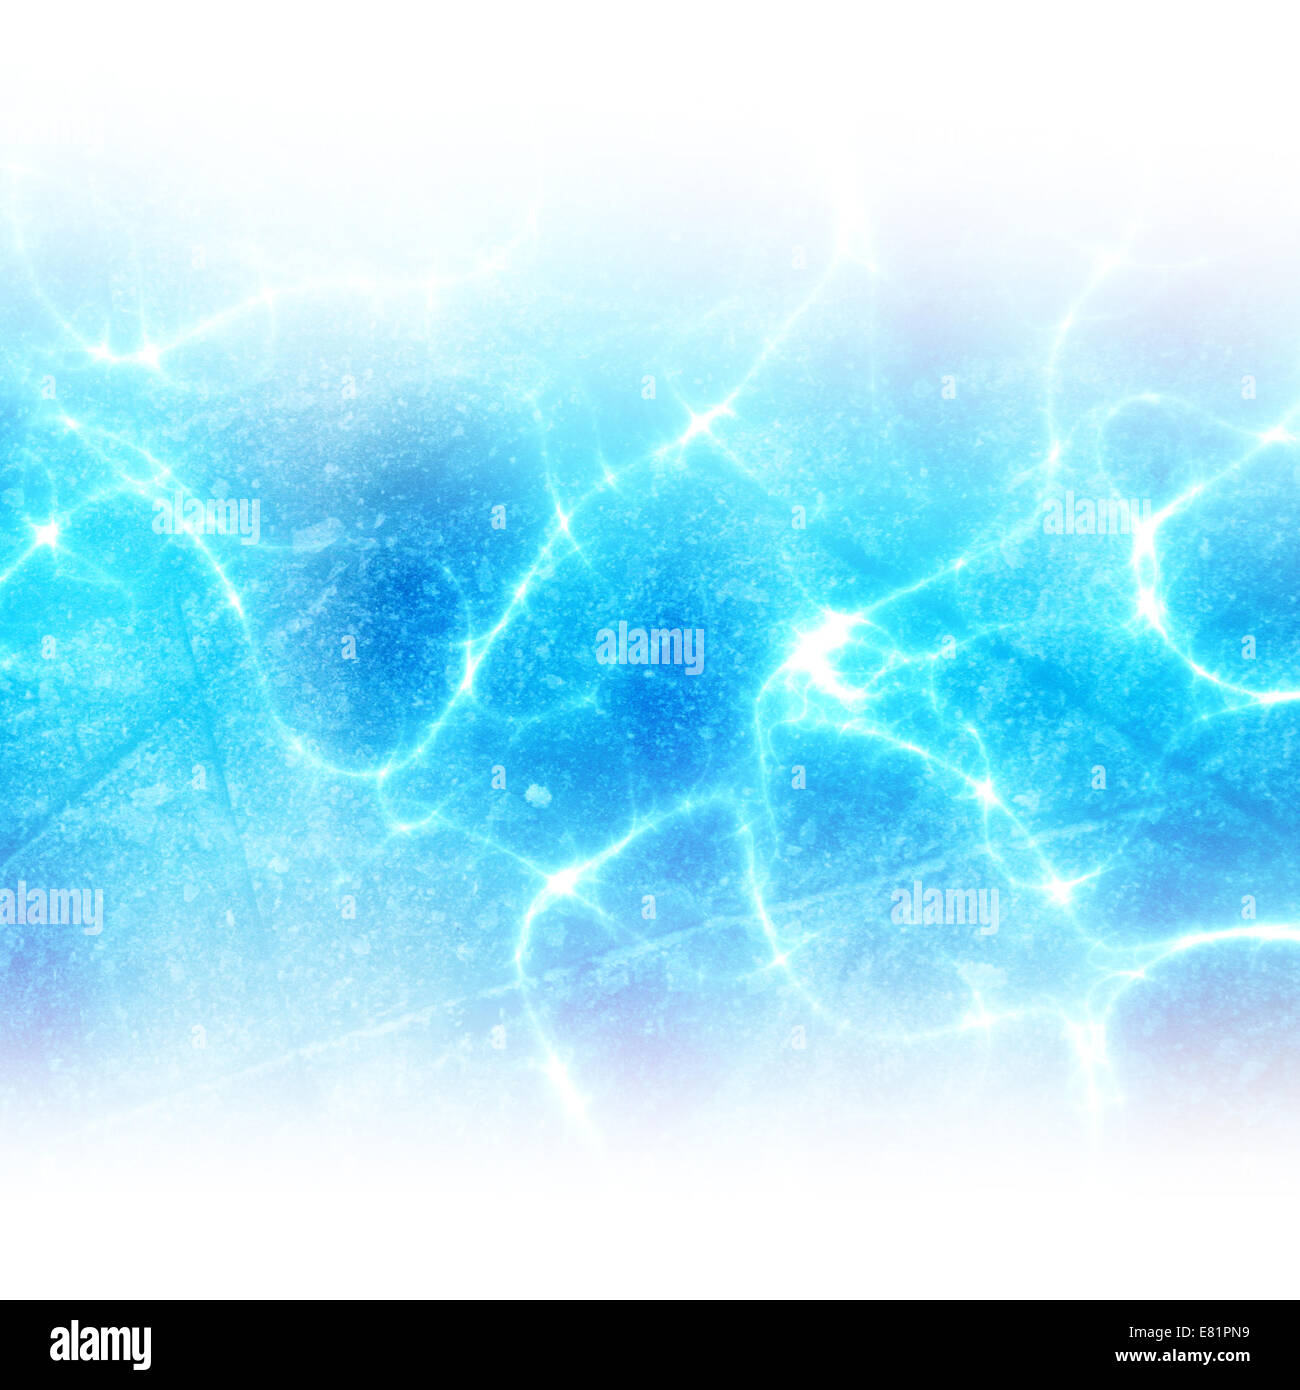 blue and white abstract background Stock Photo